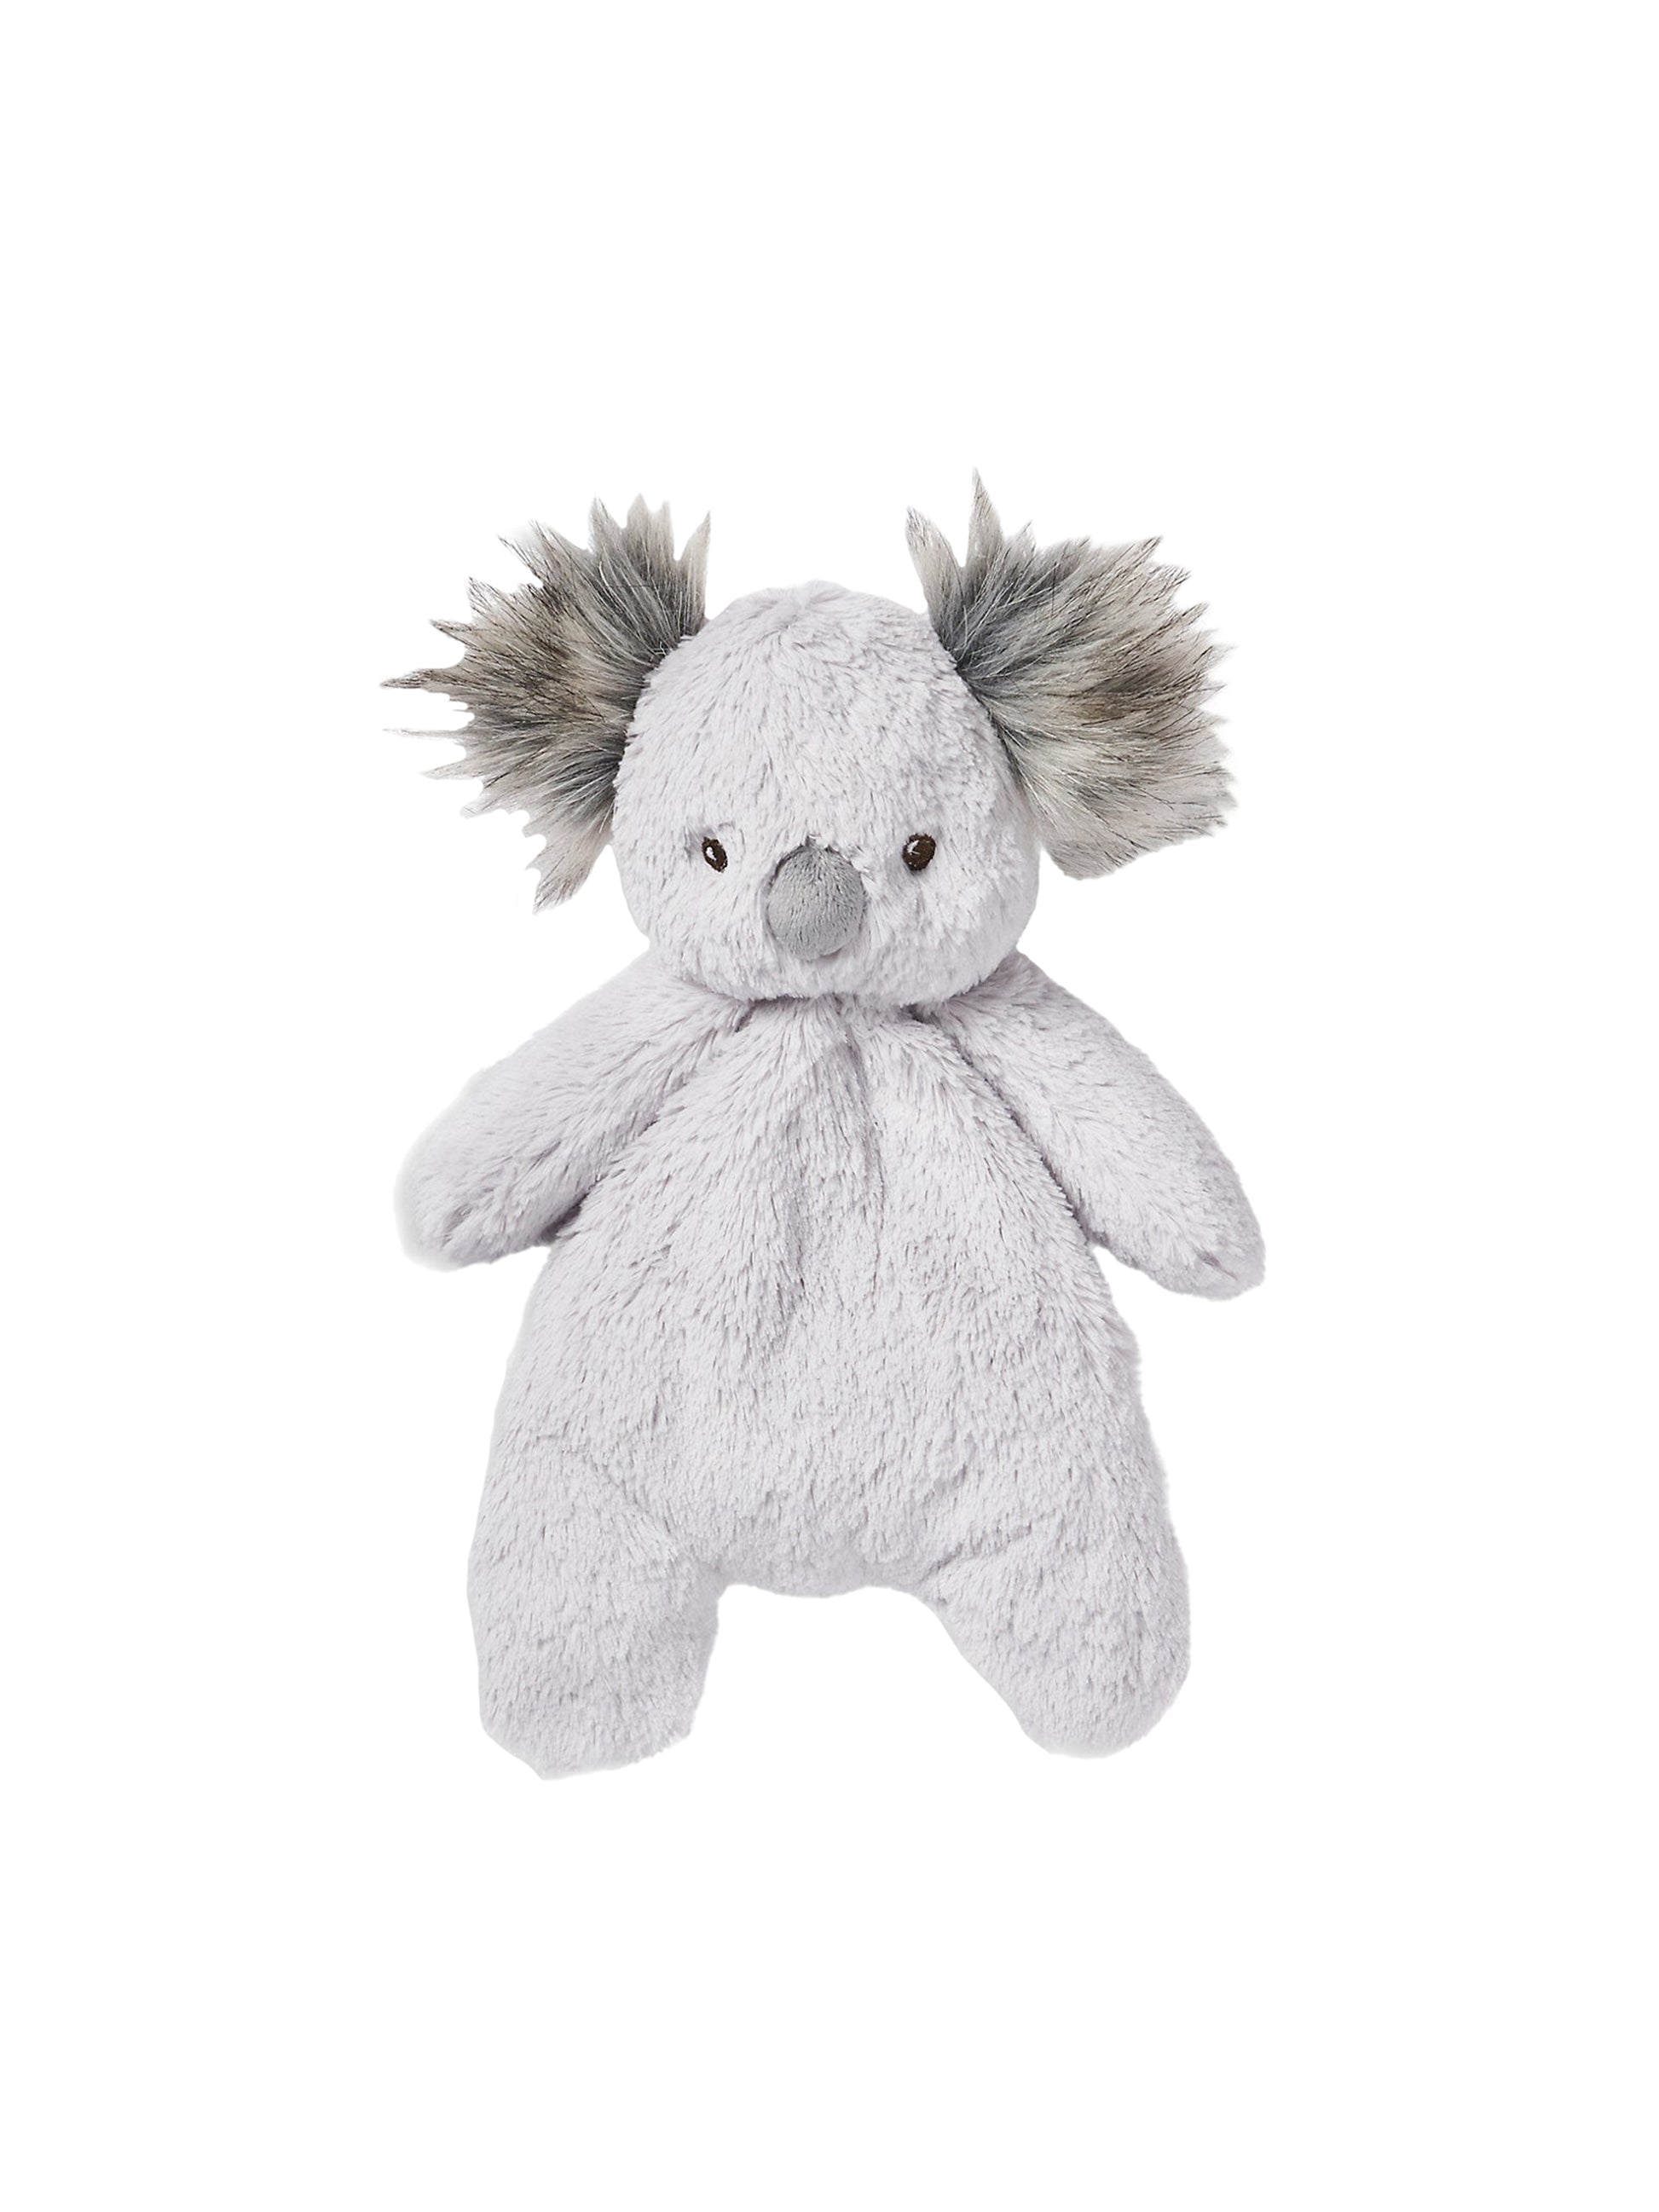 Baby Animal Snuggler with Gift Box Weston Table